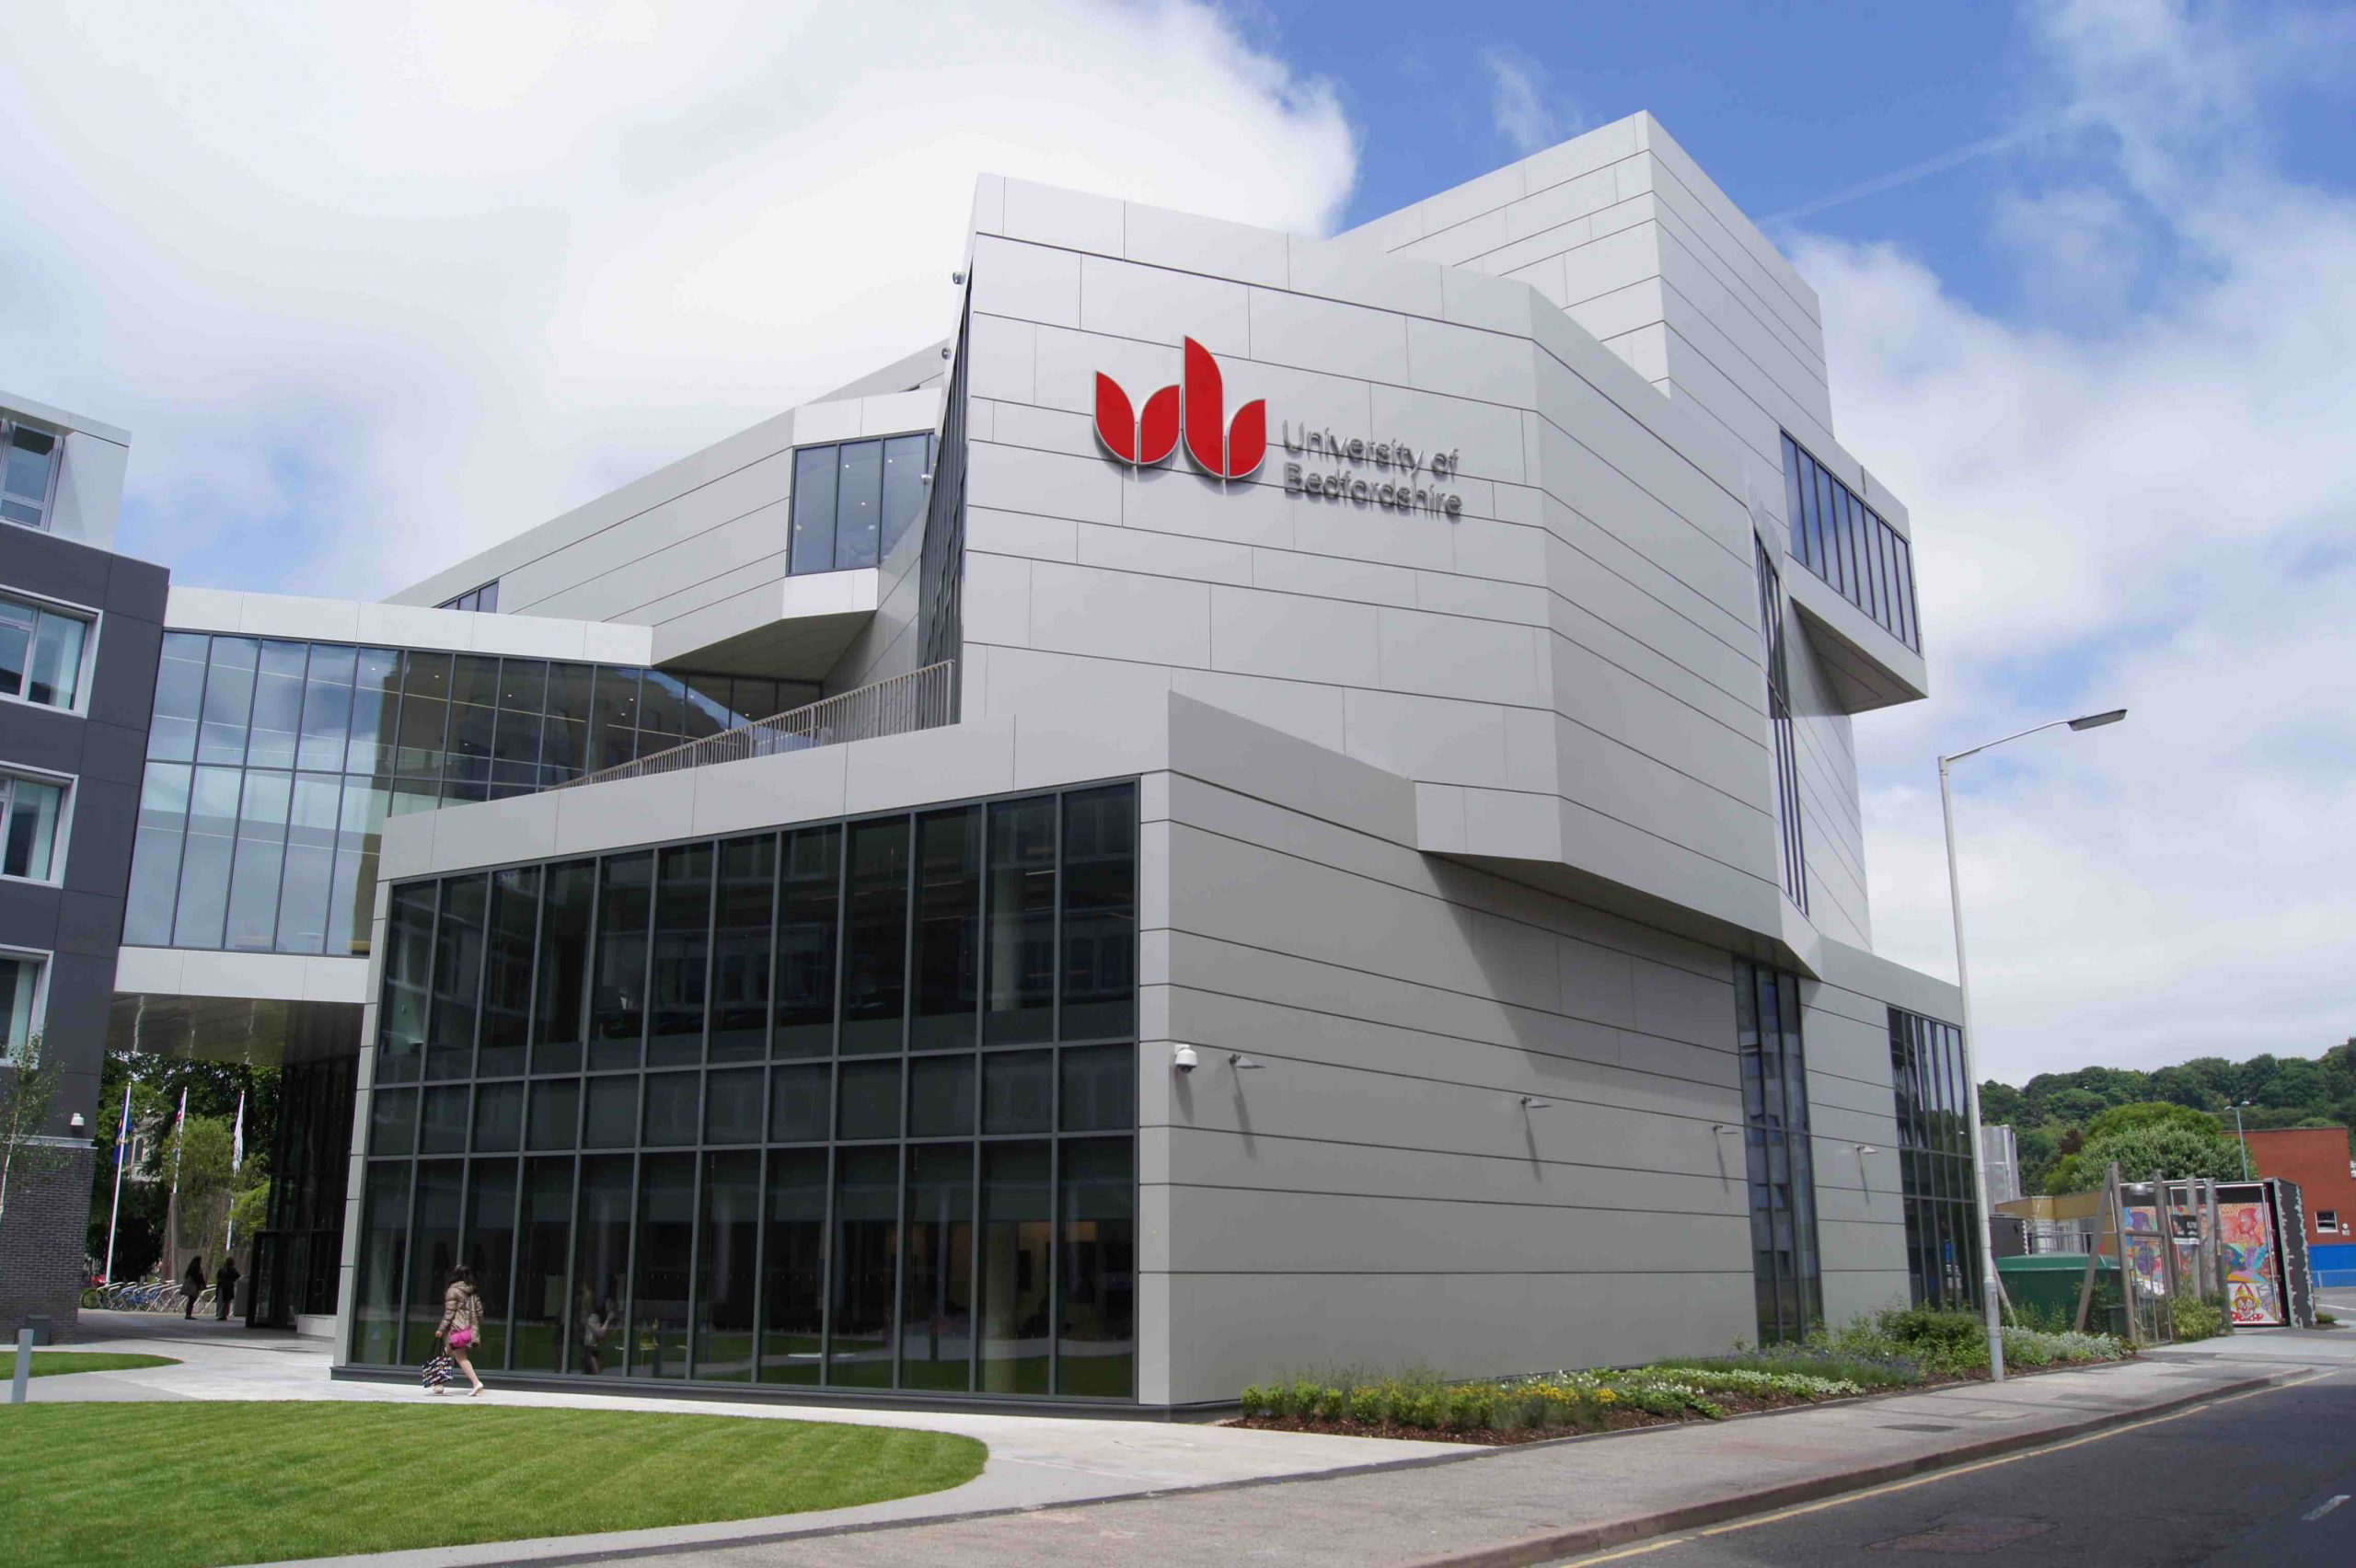 B.A. Journalism in University of Bedfordshire